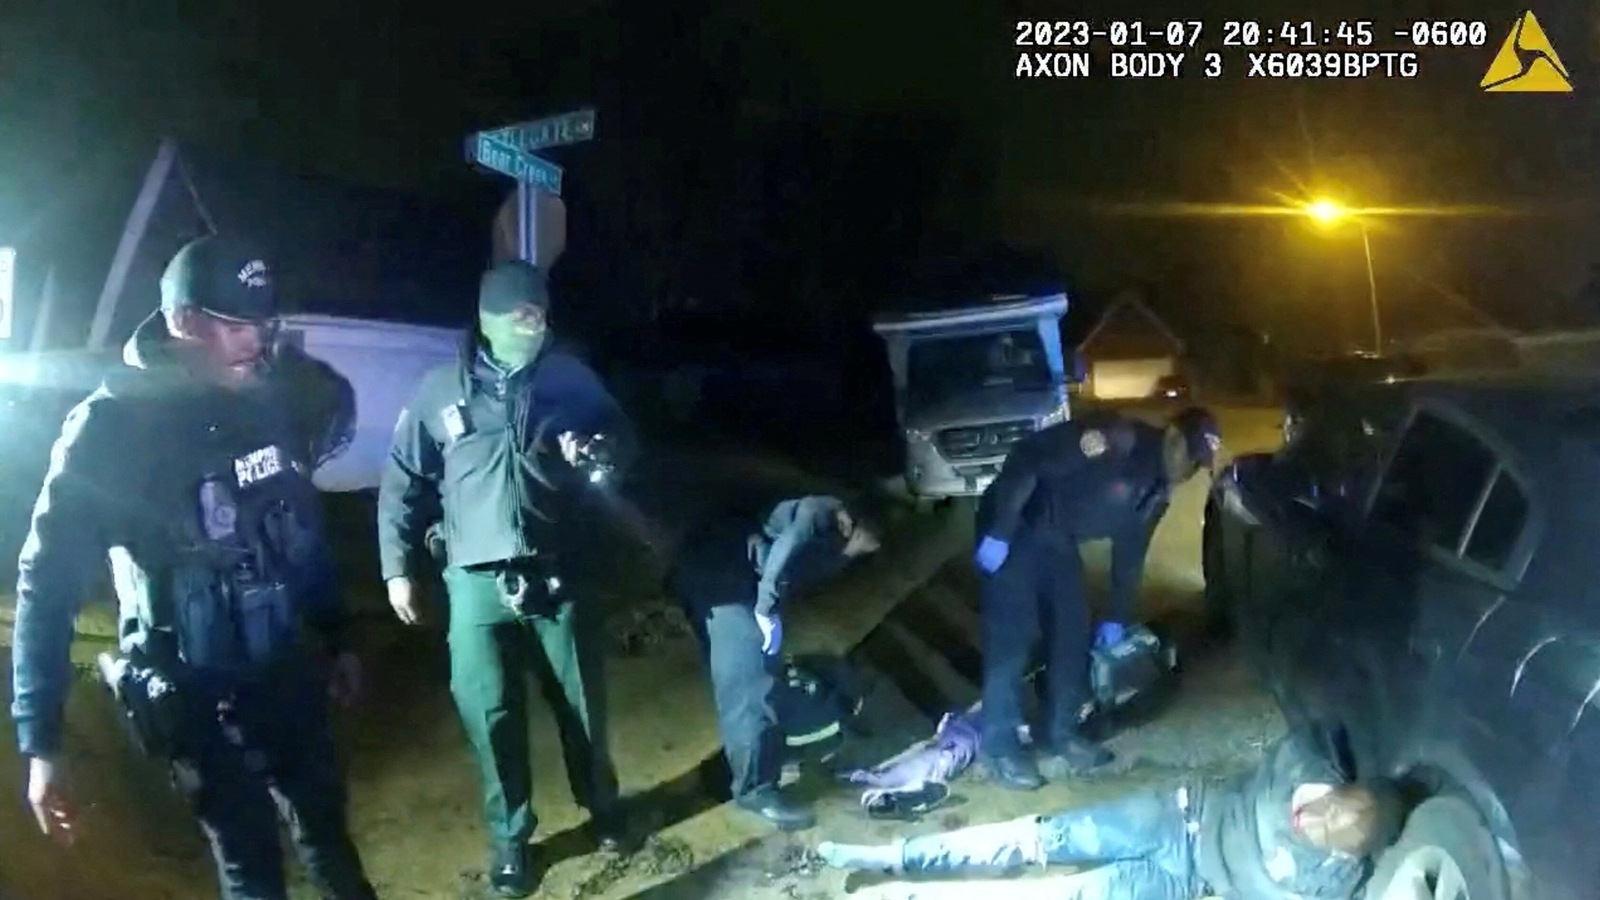 Tyre Nichols' police beating videos released: What do they show